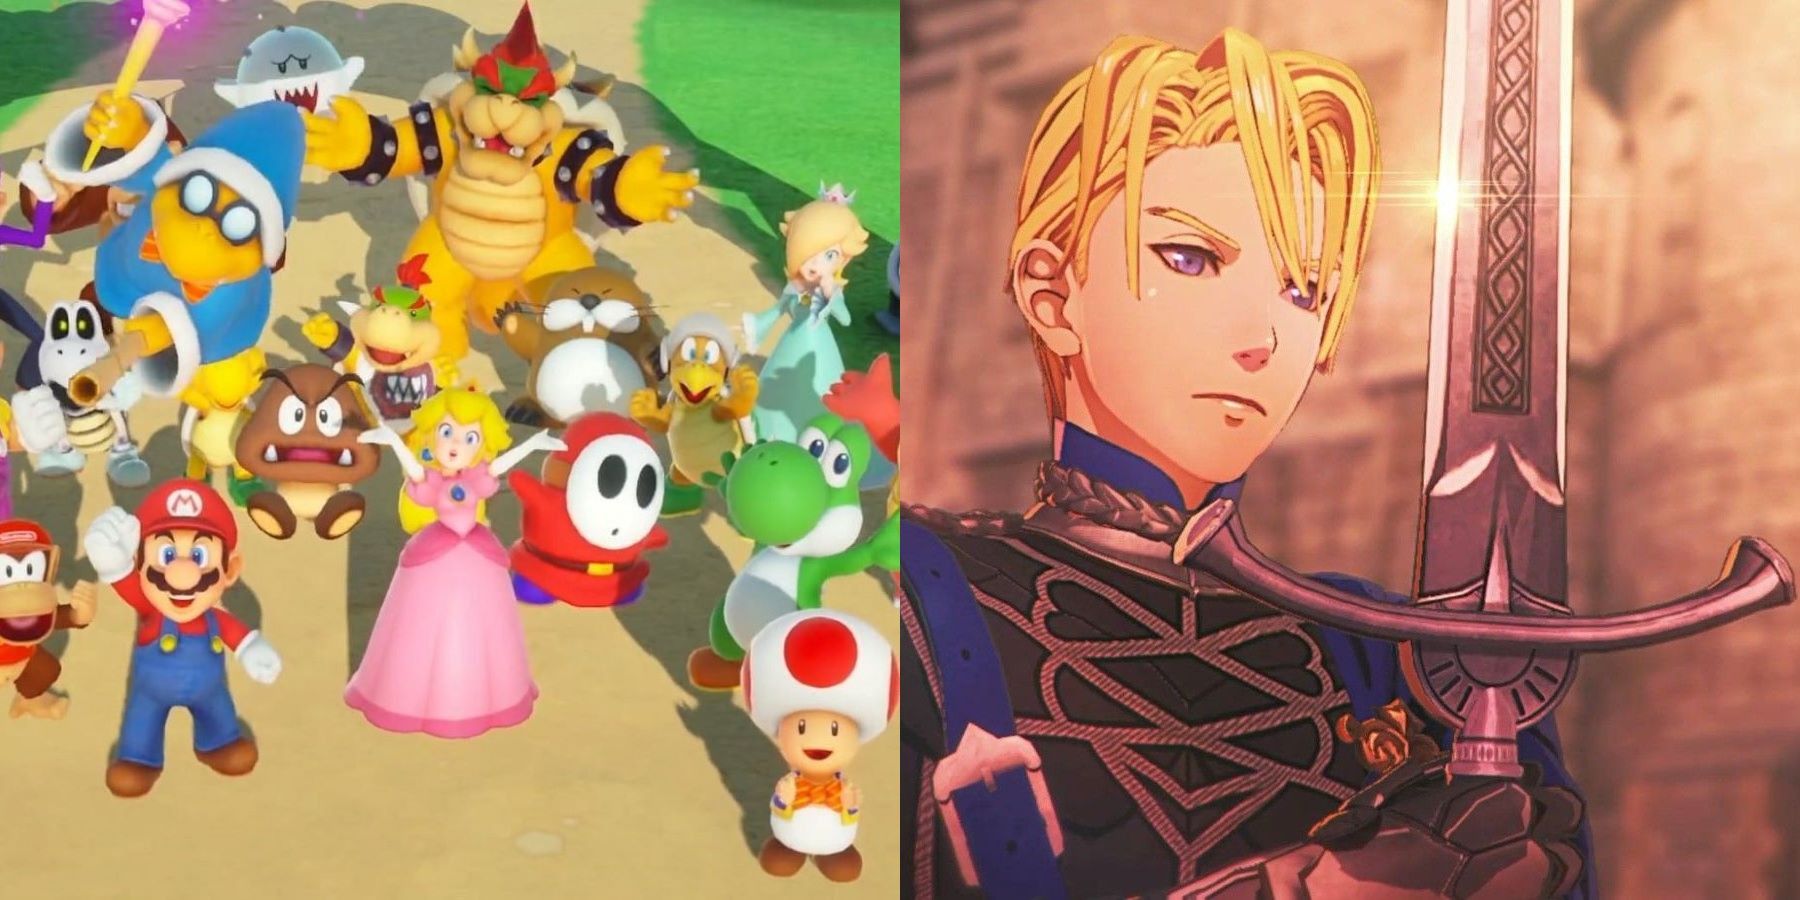 The cast of Super Mario Party next to Dimitri from Fire Emblem Warriors: Three Houses